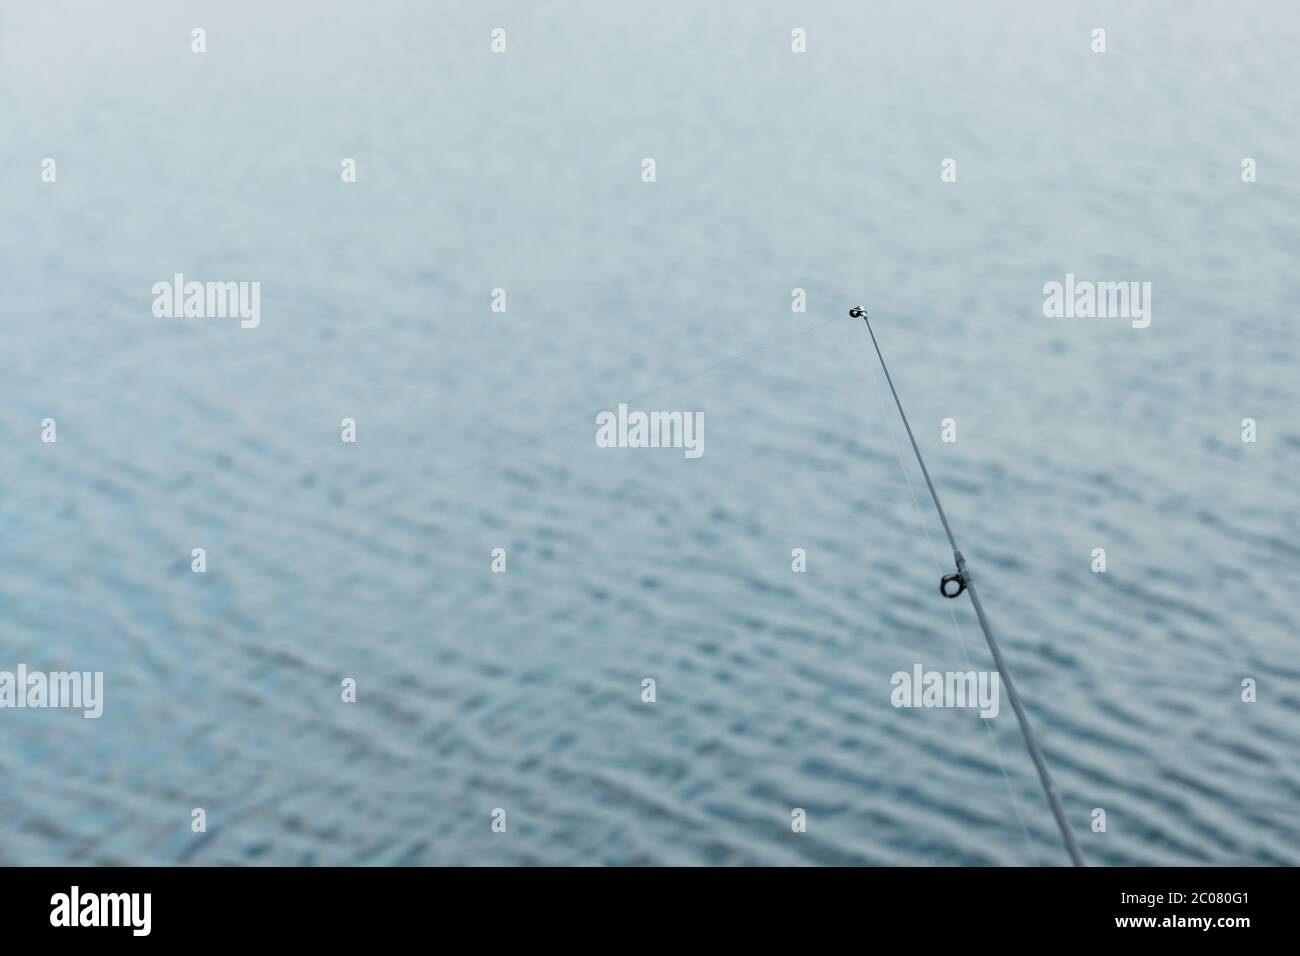 Detail of the fishing pole and the string by the water Stock Photo